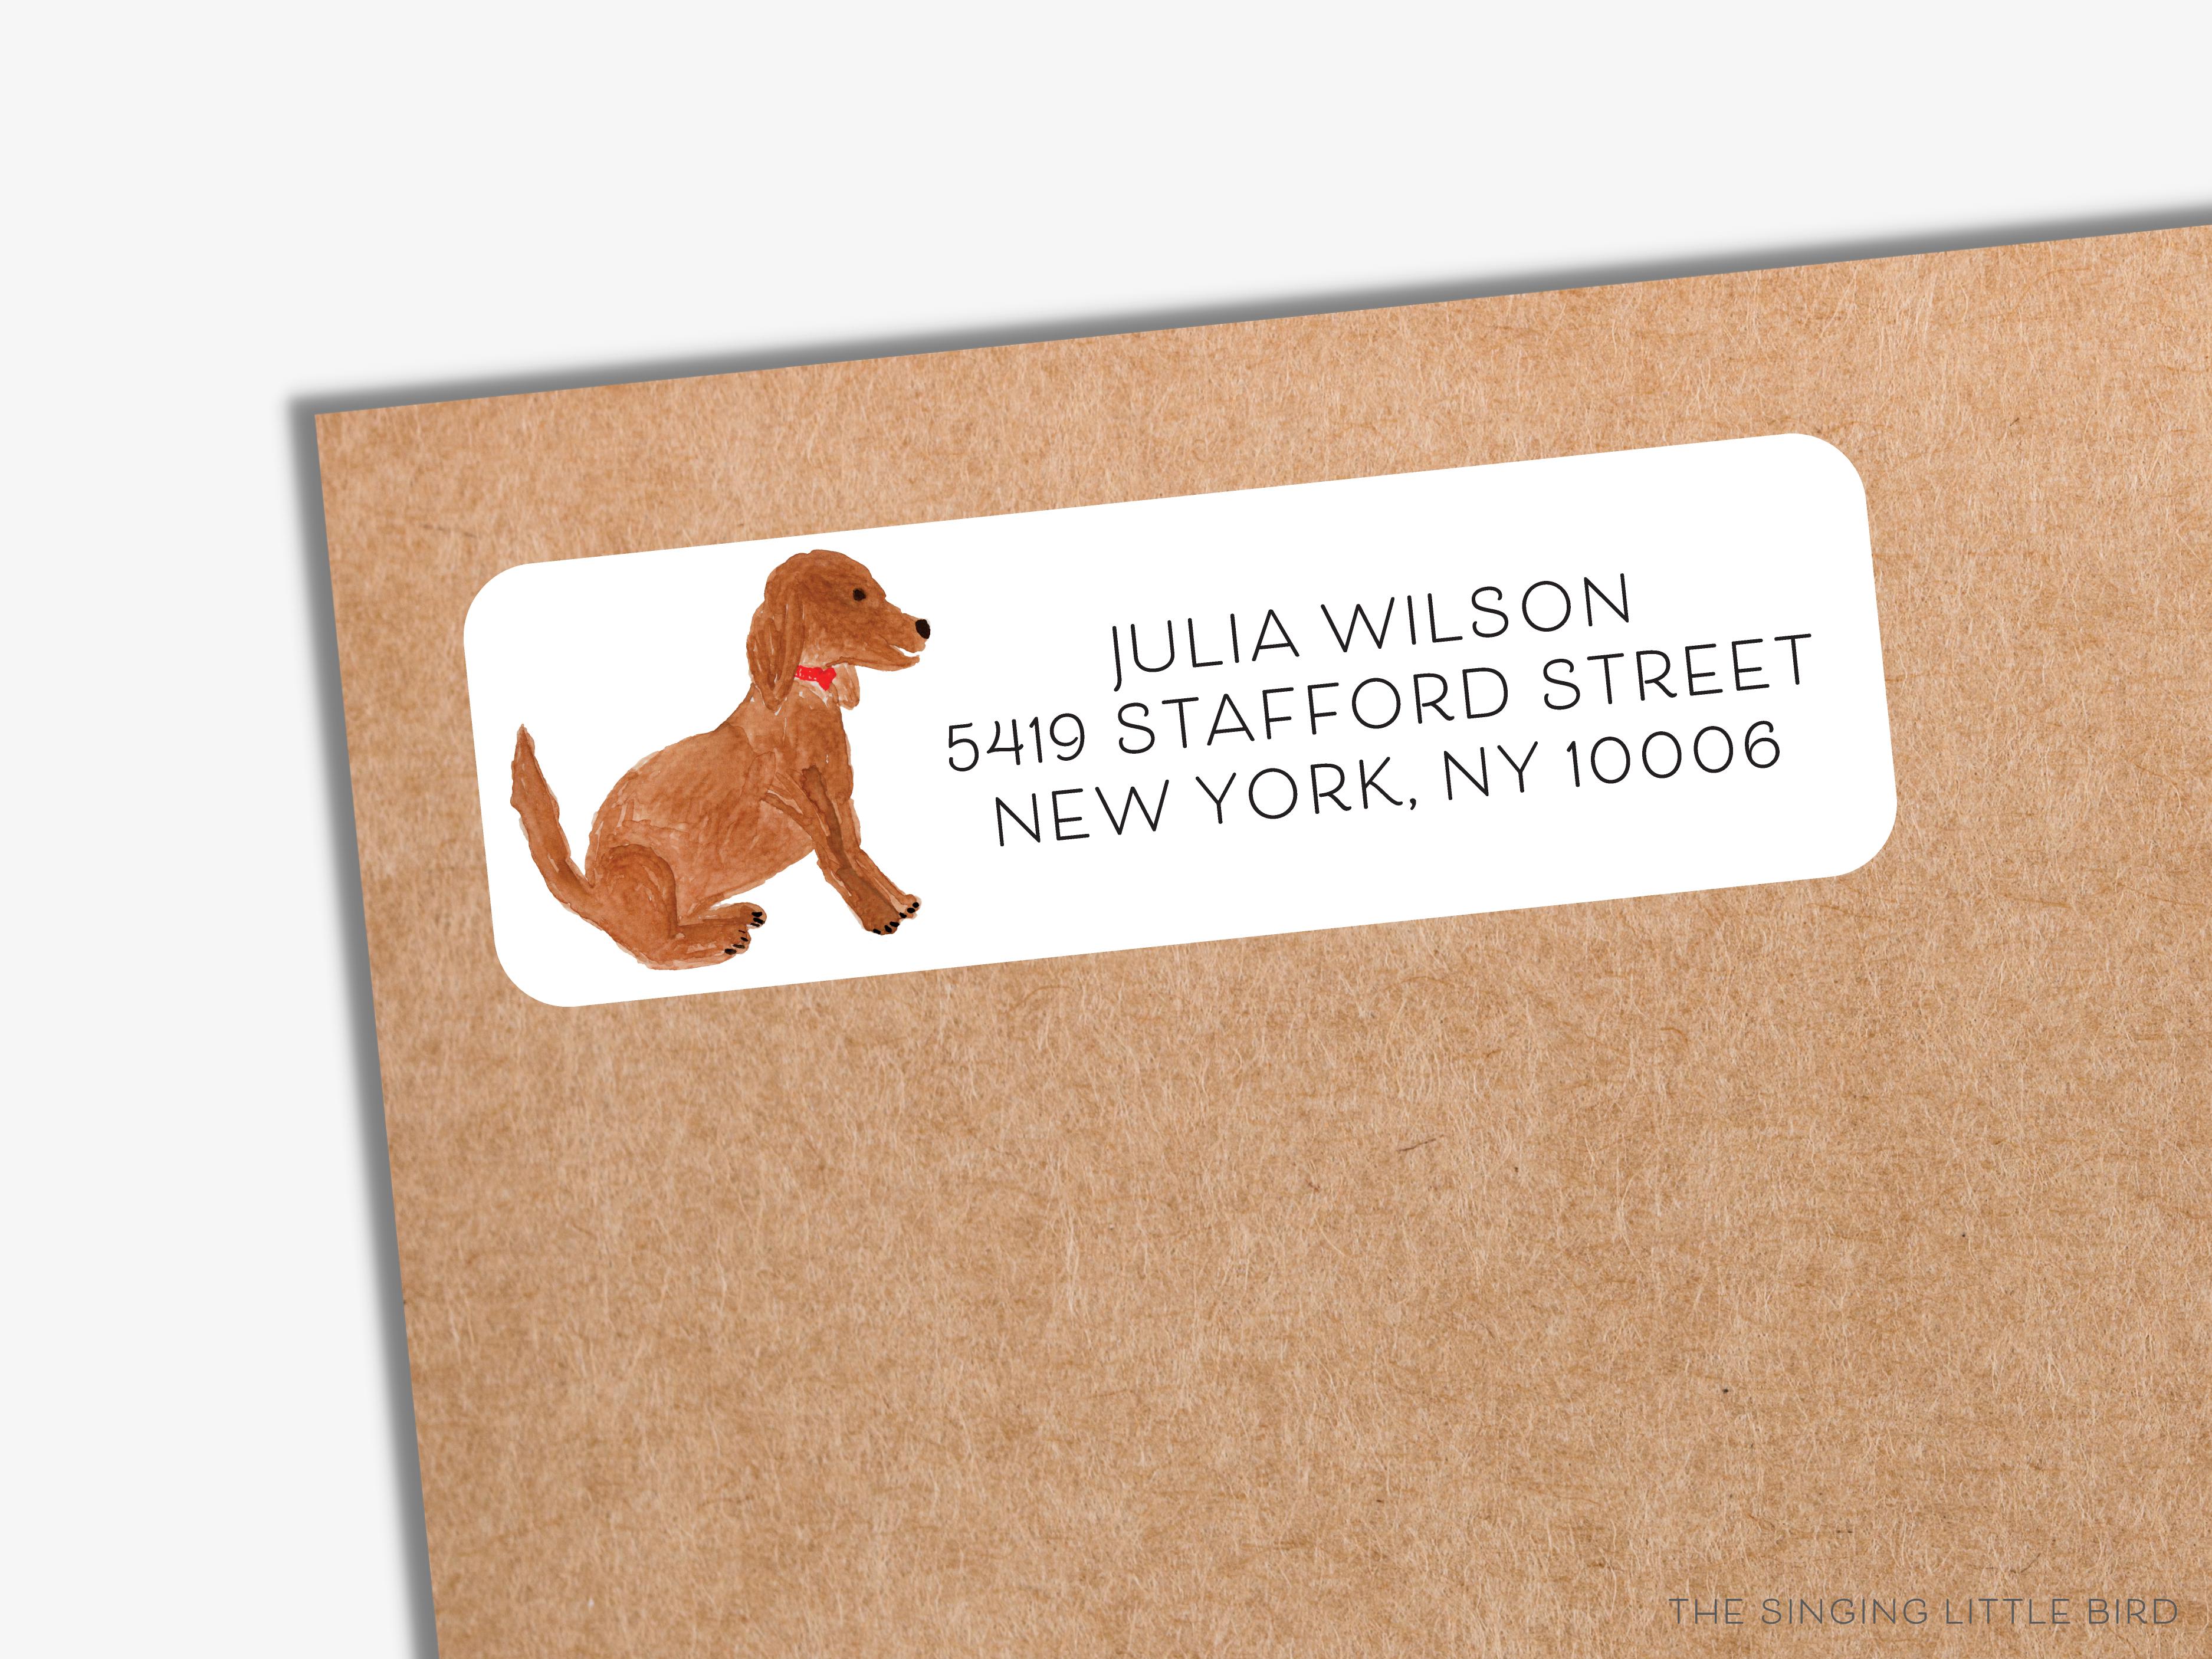 Dog Lover Return Address Labels-These personalized return address labels are 2.625" x 1" and feature our hand-painted watercolor dog, printed in the USA on beautiful matte finish labels. These make great gifts for yourself or the animal lover.-The Singing Little Bird